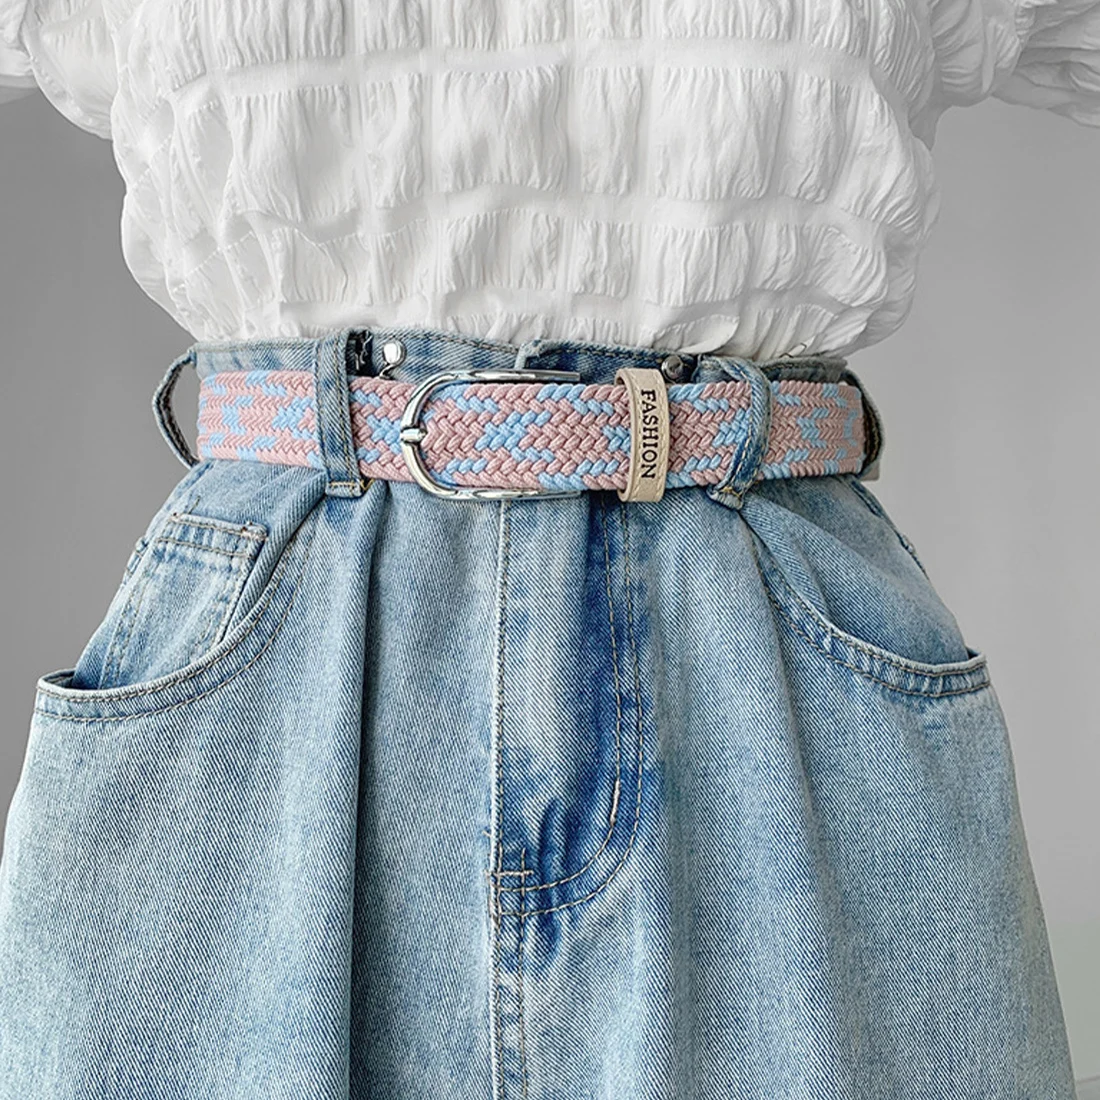 New No Punching Breathable Alloy Belt Buckle Belt Elastic Lazy Belt Fashion Braid Canvas Casual Waistband Candy Color Belt